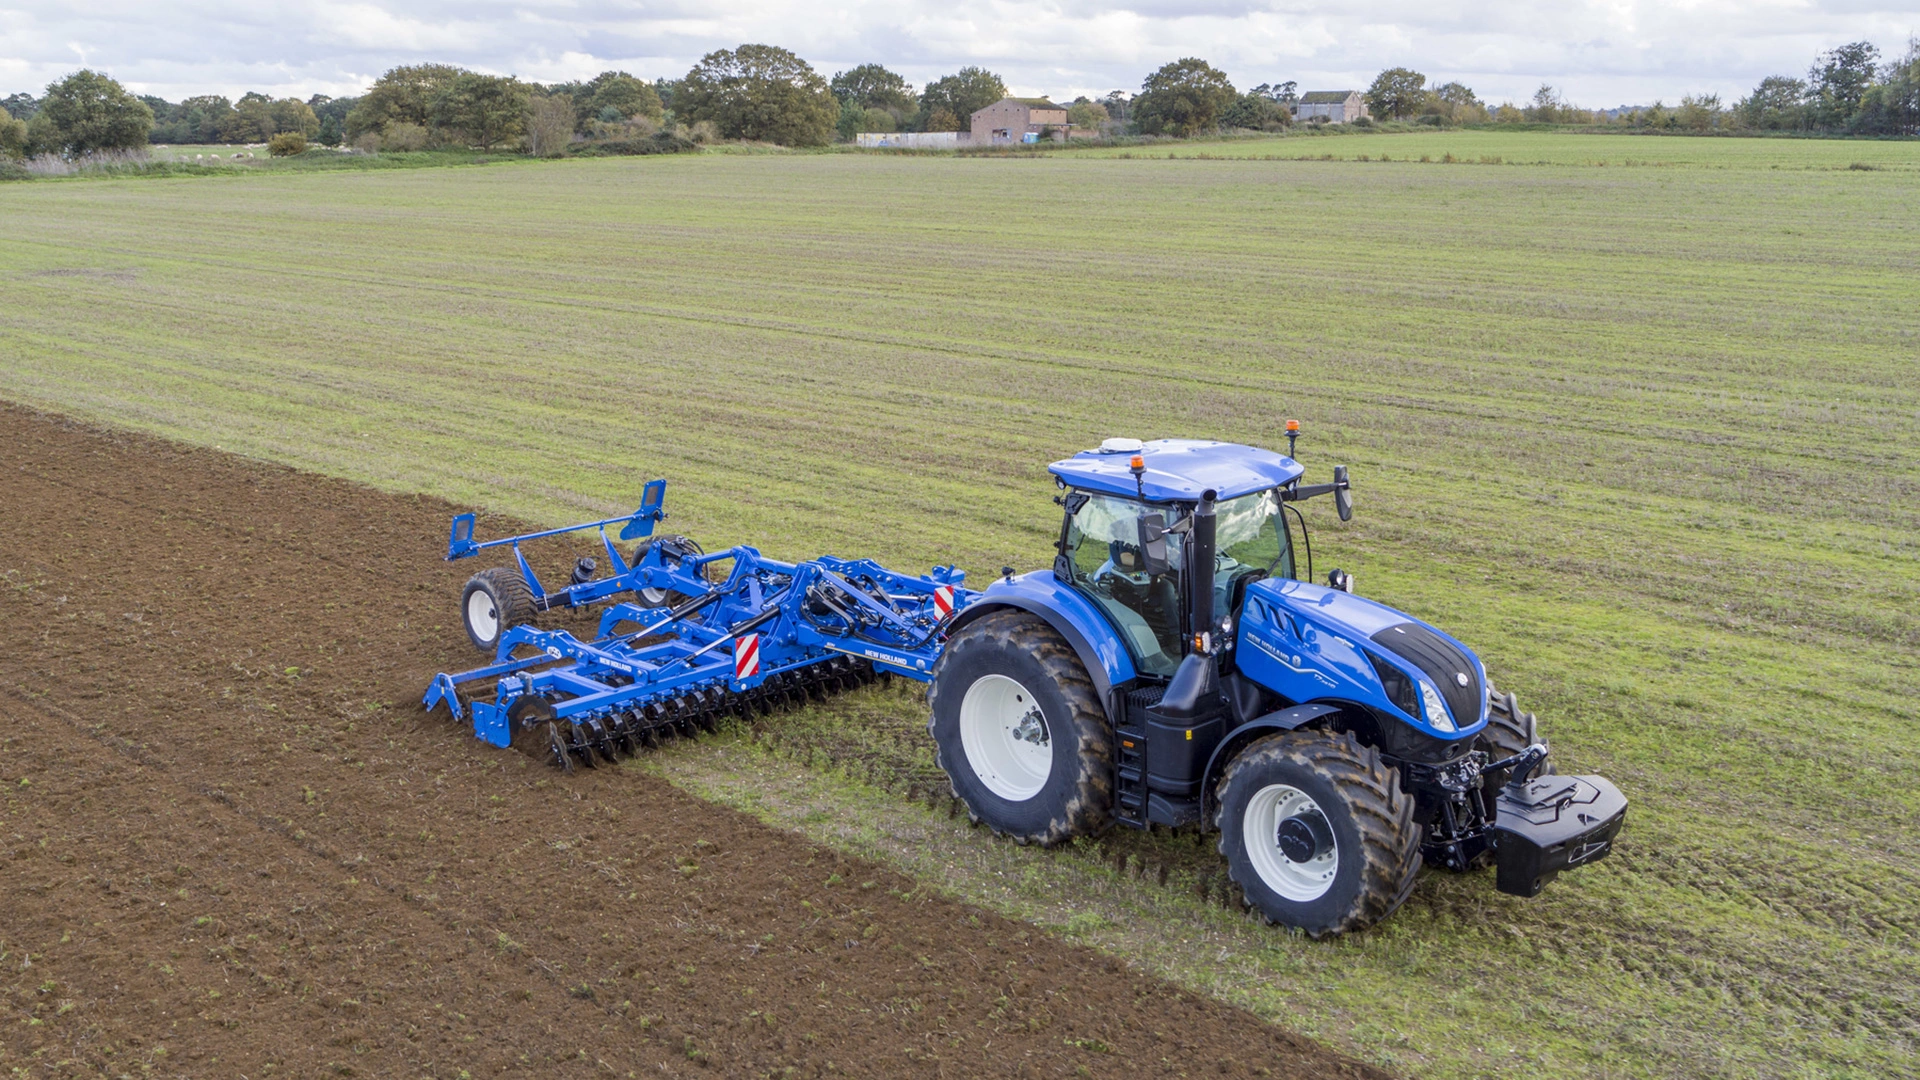 New Holland's Tractor with SDM & SDH Disc Cultivators working on the field